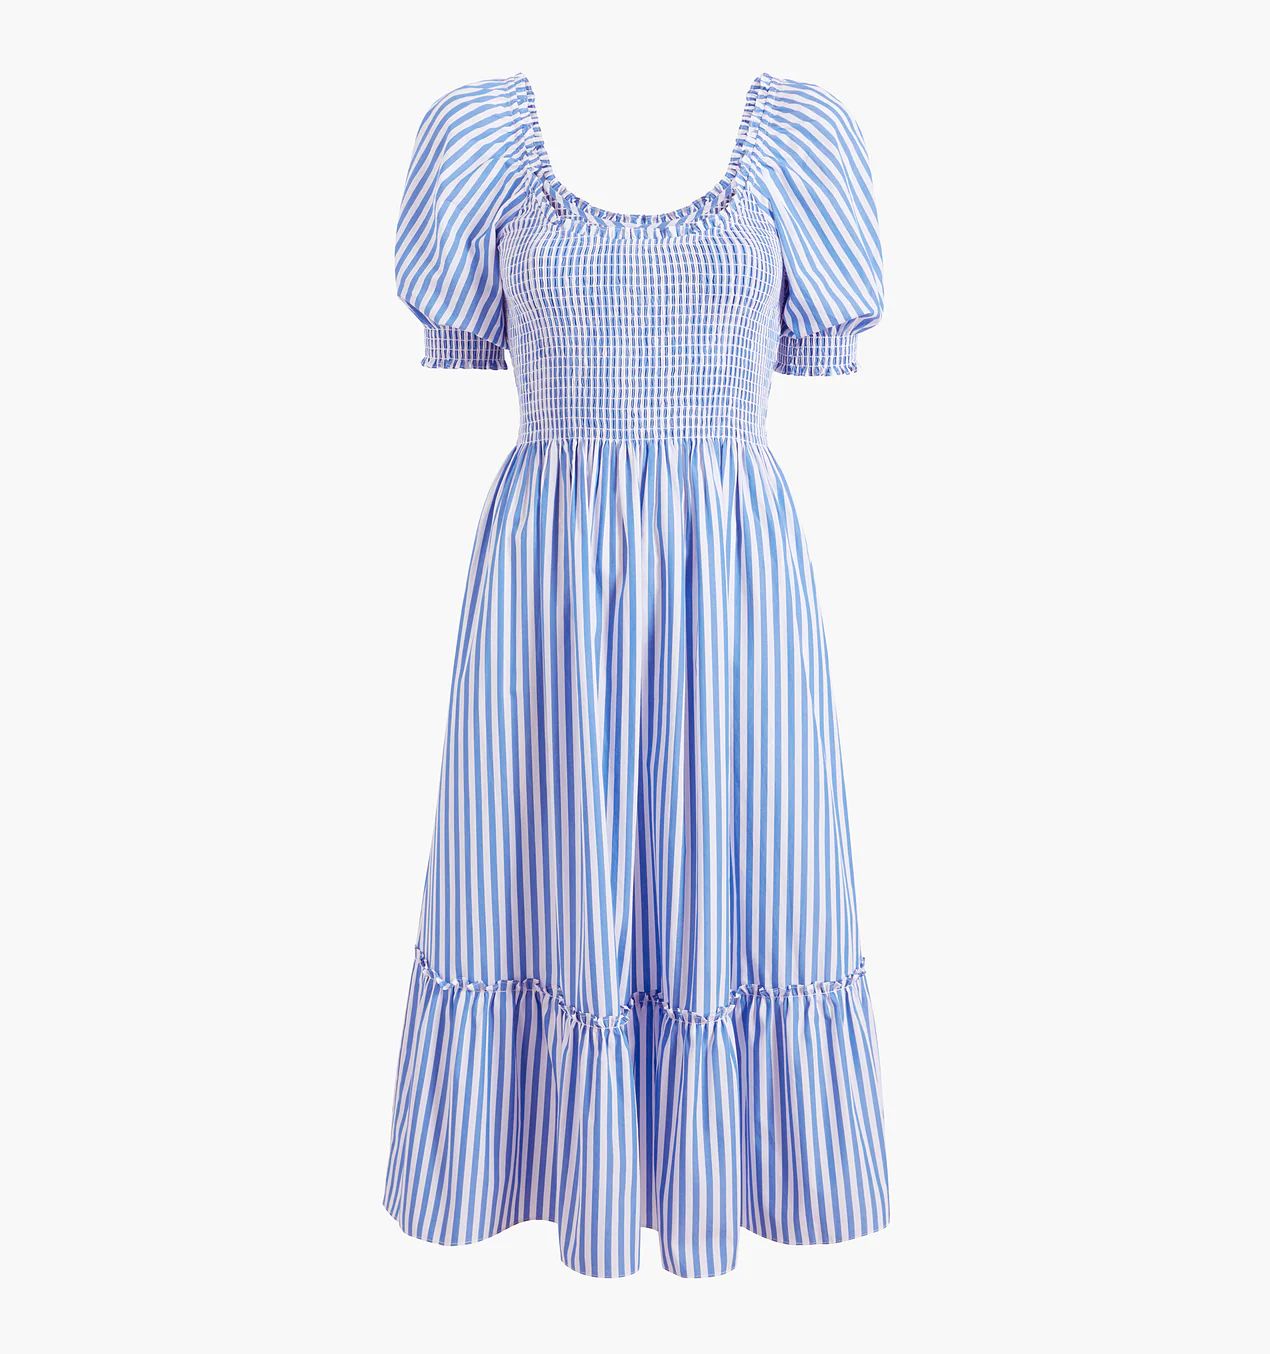 The Louisa Nap Dress - Blueberry Stripe | Hill House Home